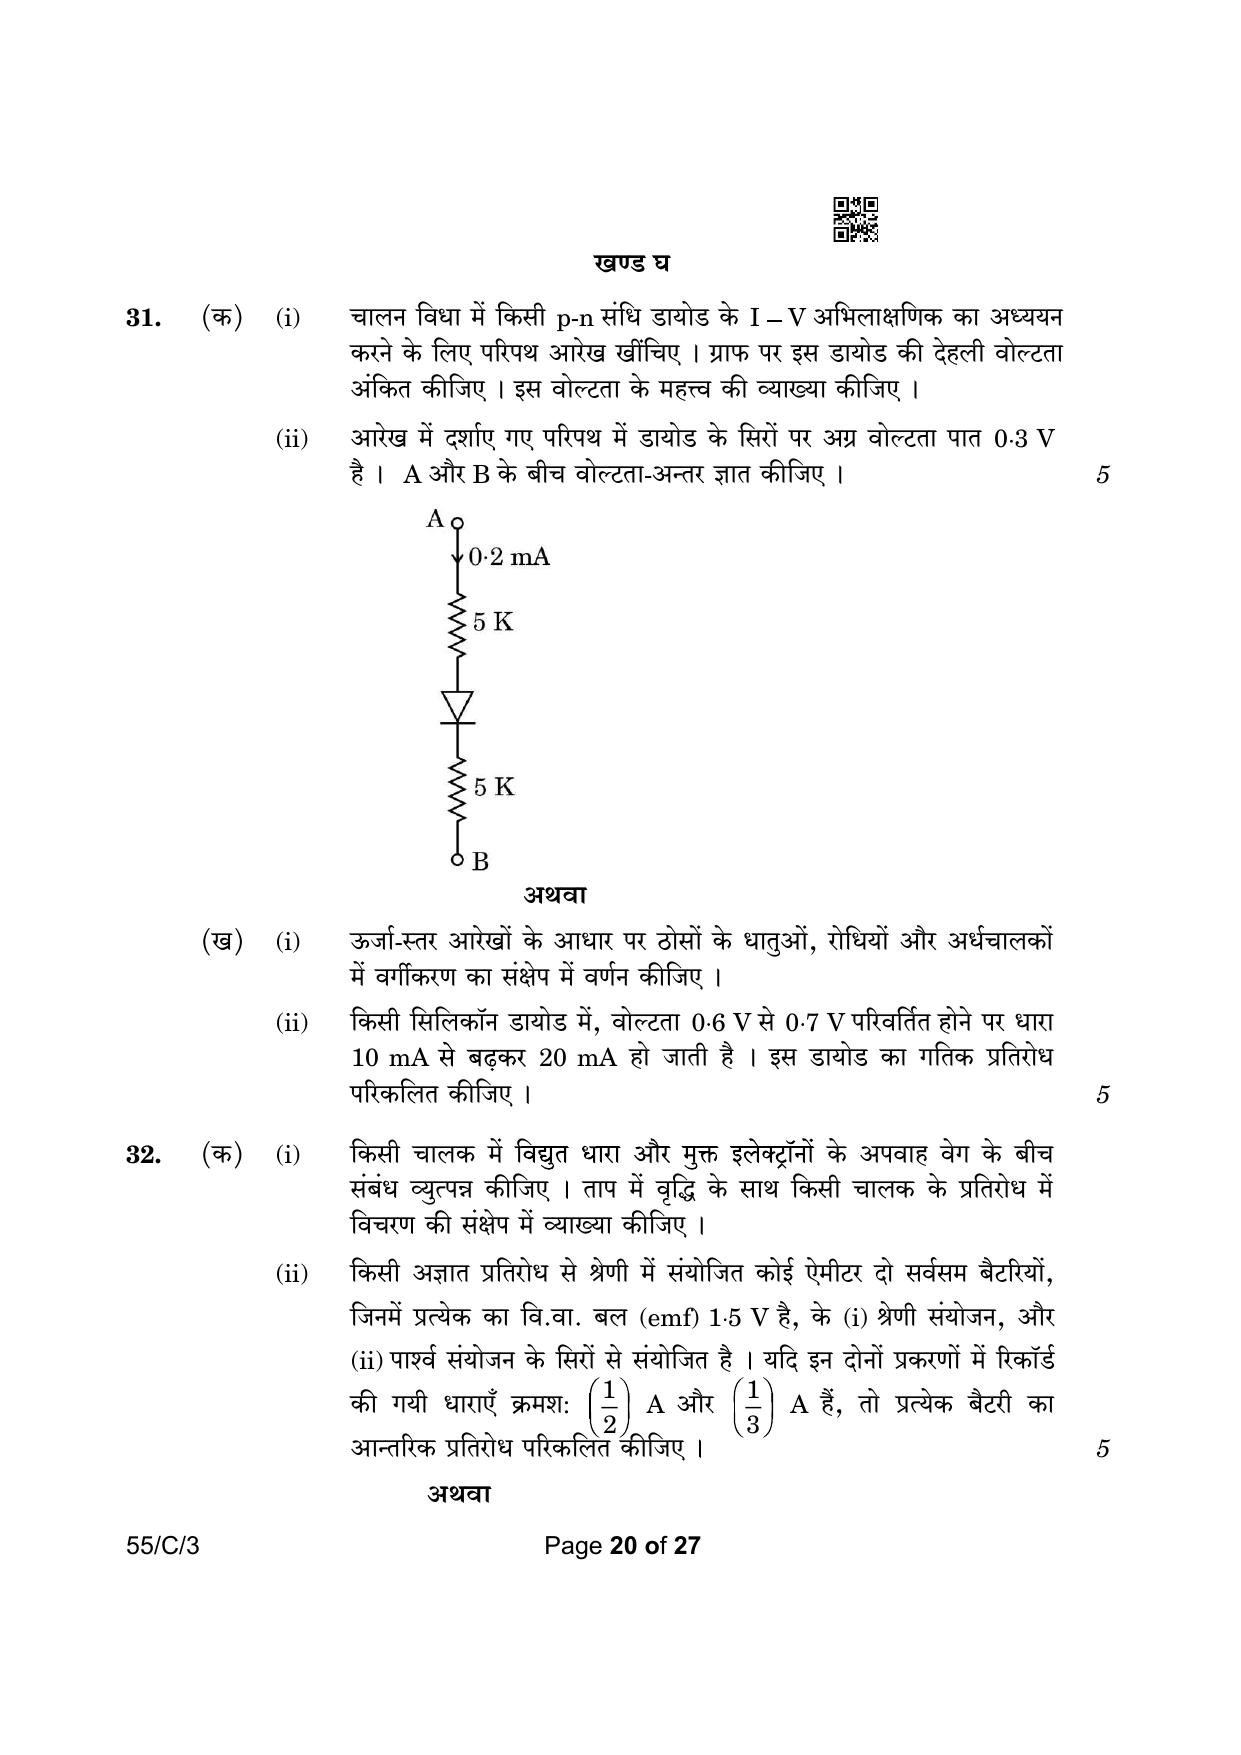 CBSE Class 12 55-3 Physics 2023 (Compartment) Question Paper - Page 20